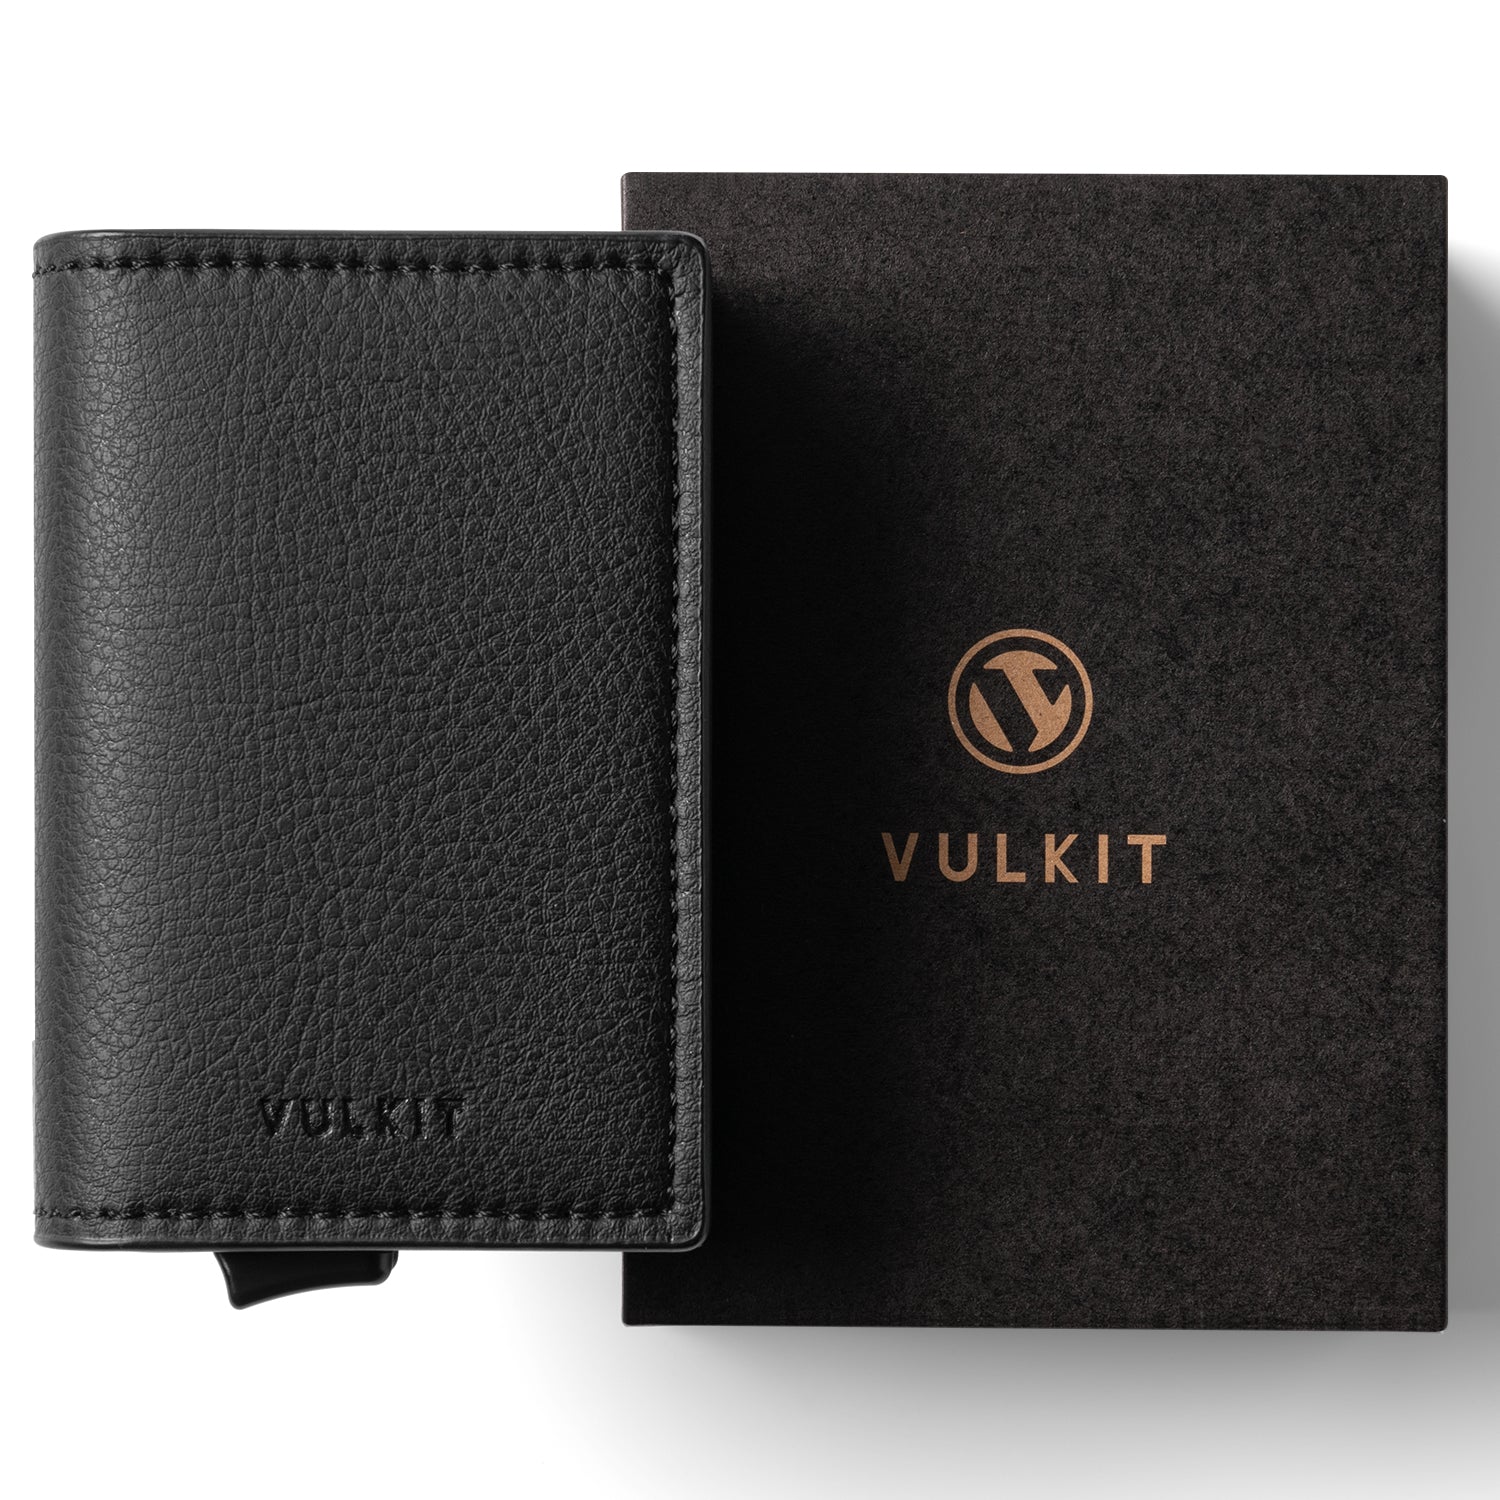 VC201d- Double Aluminum Card Holders For more Storage